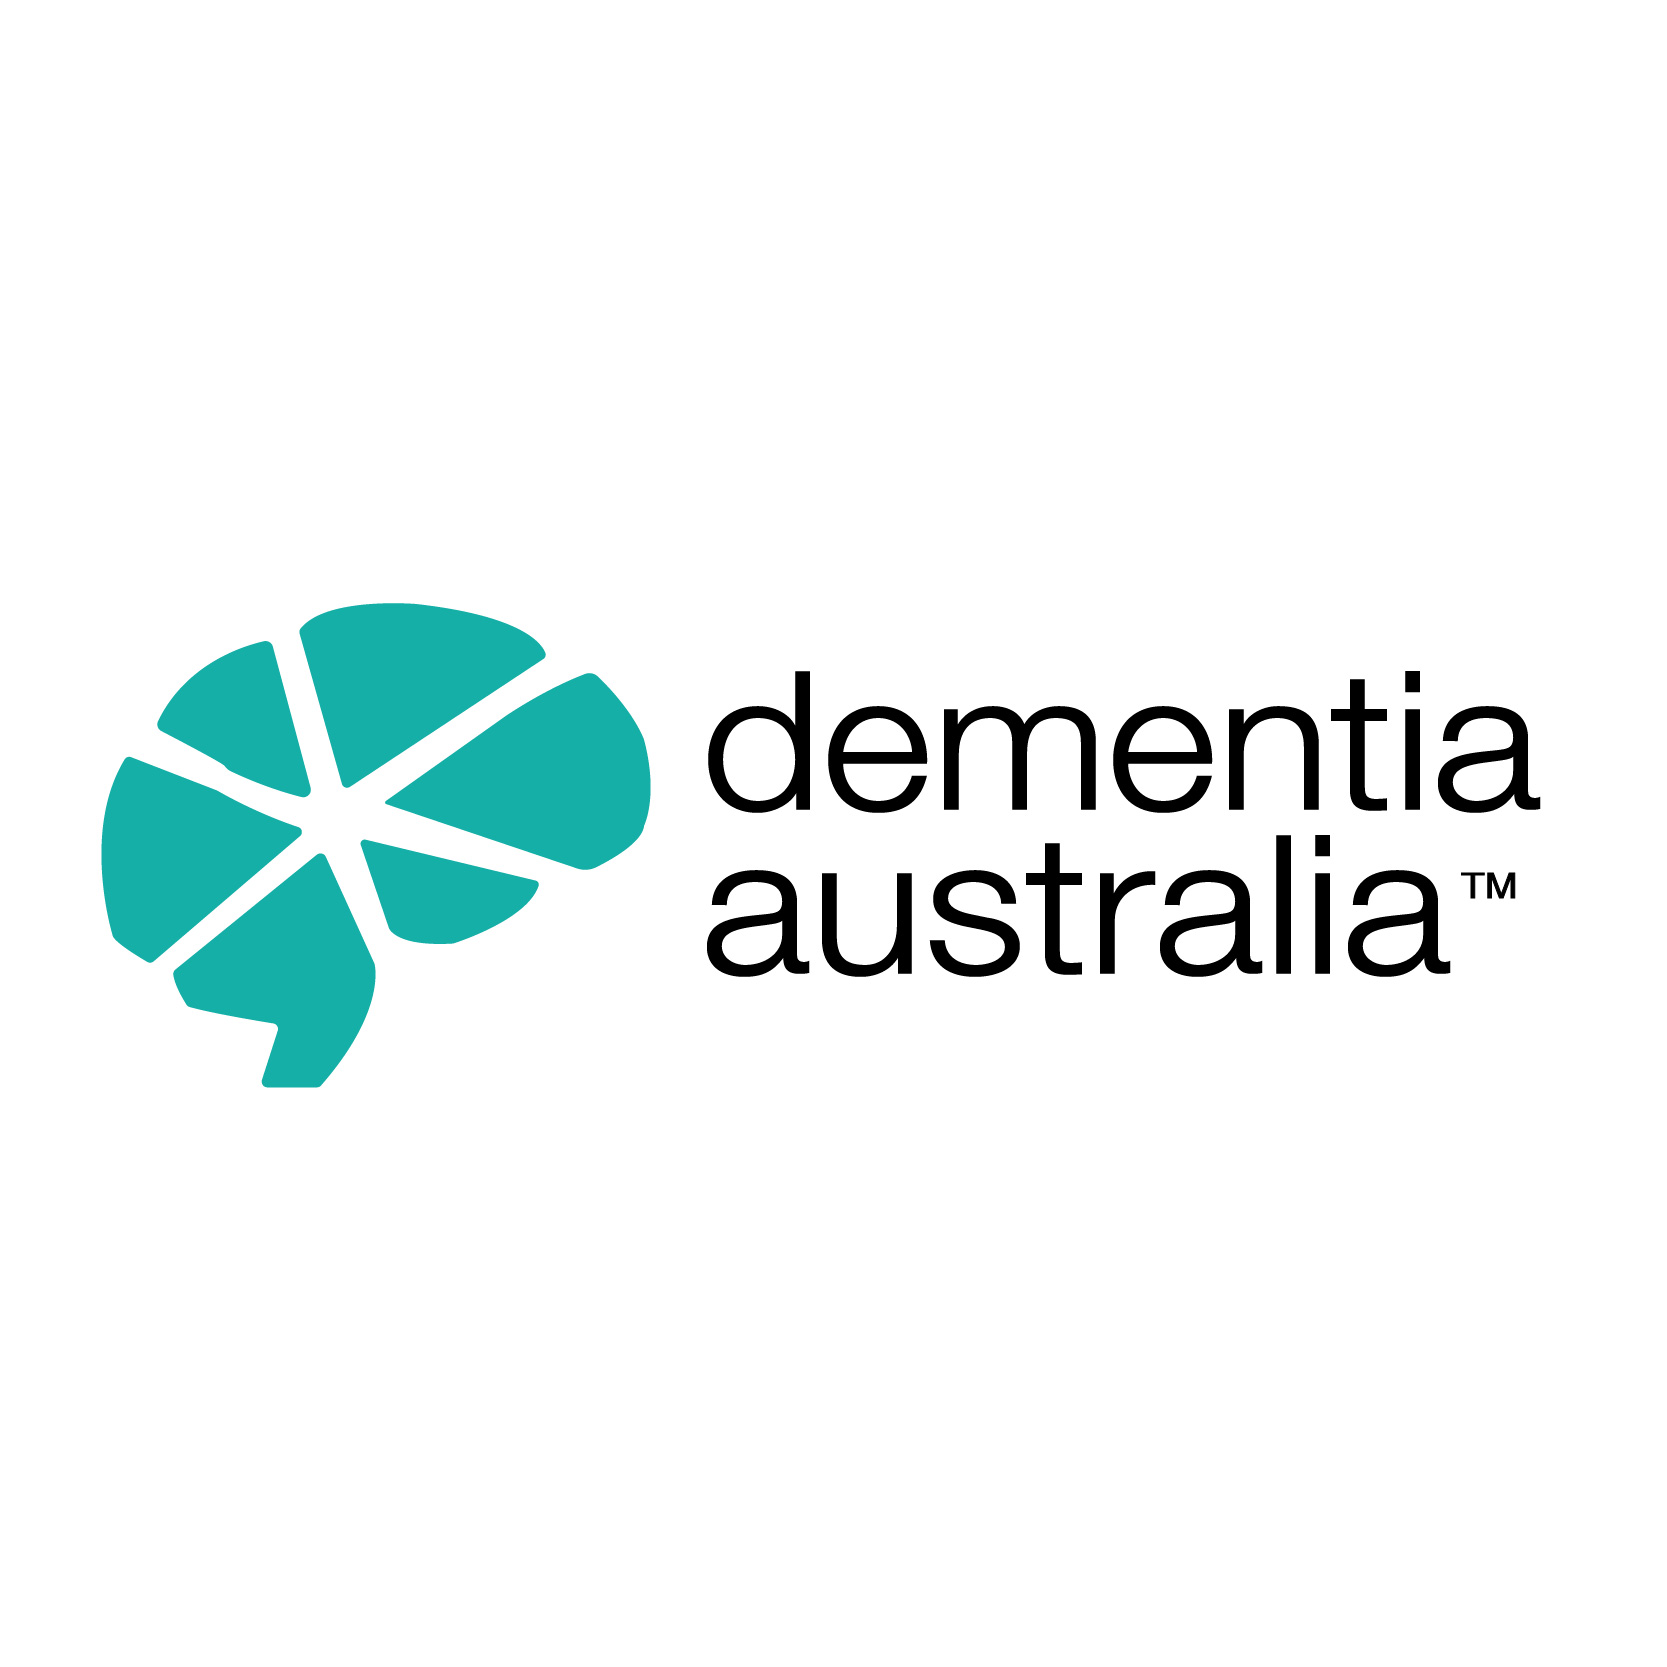 Our clients include household Australian names such as Dementia Australia.